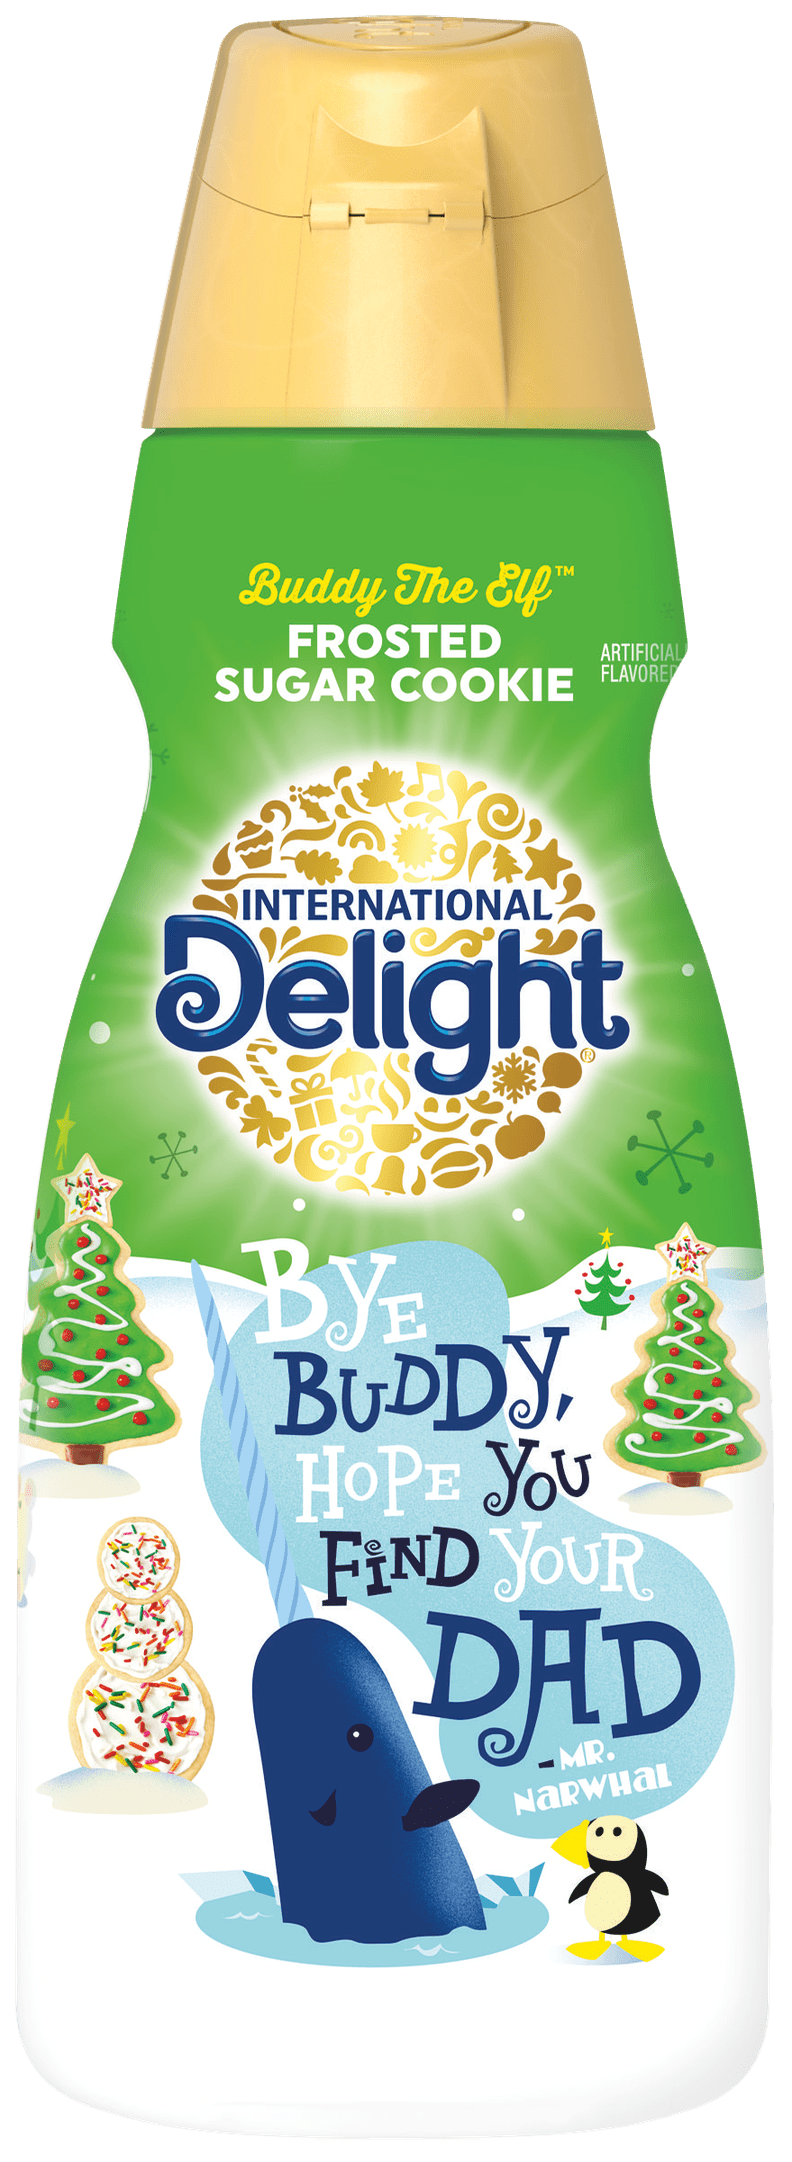 Buddy the Elf Frosted Sugar Cookie Creamer